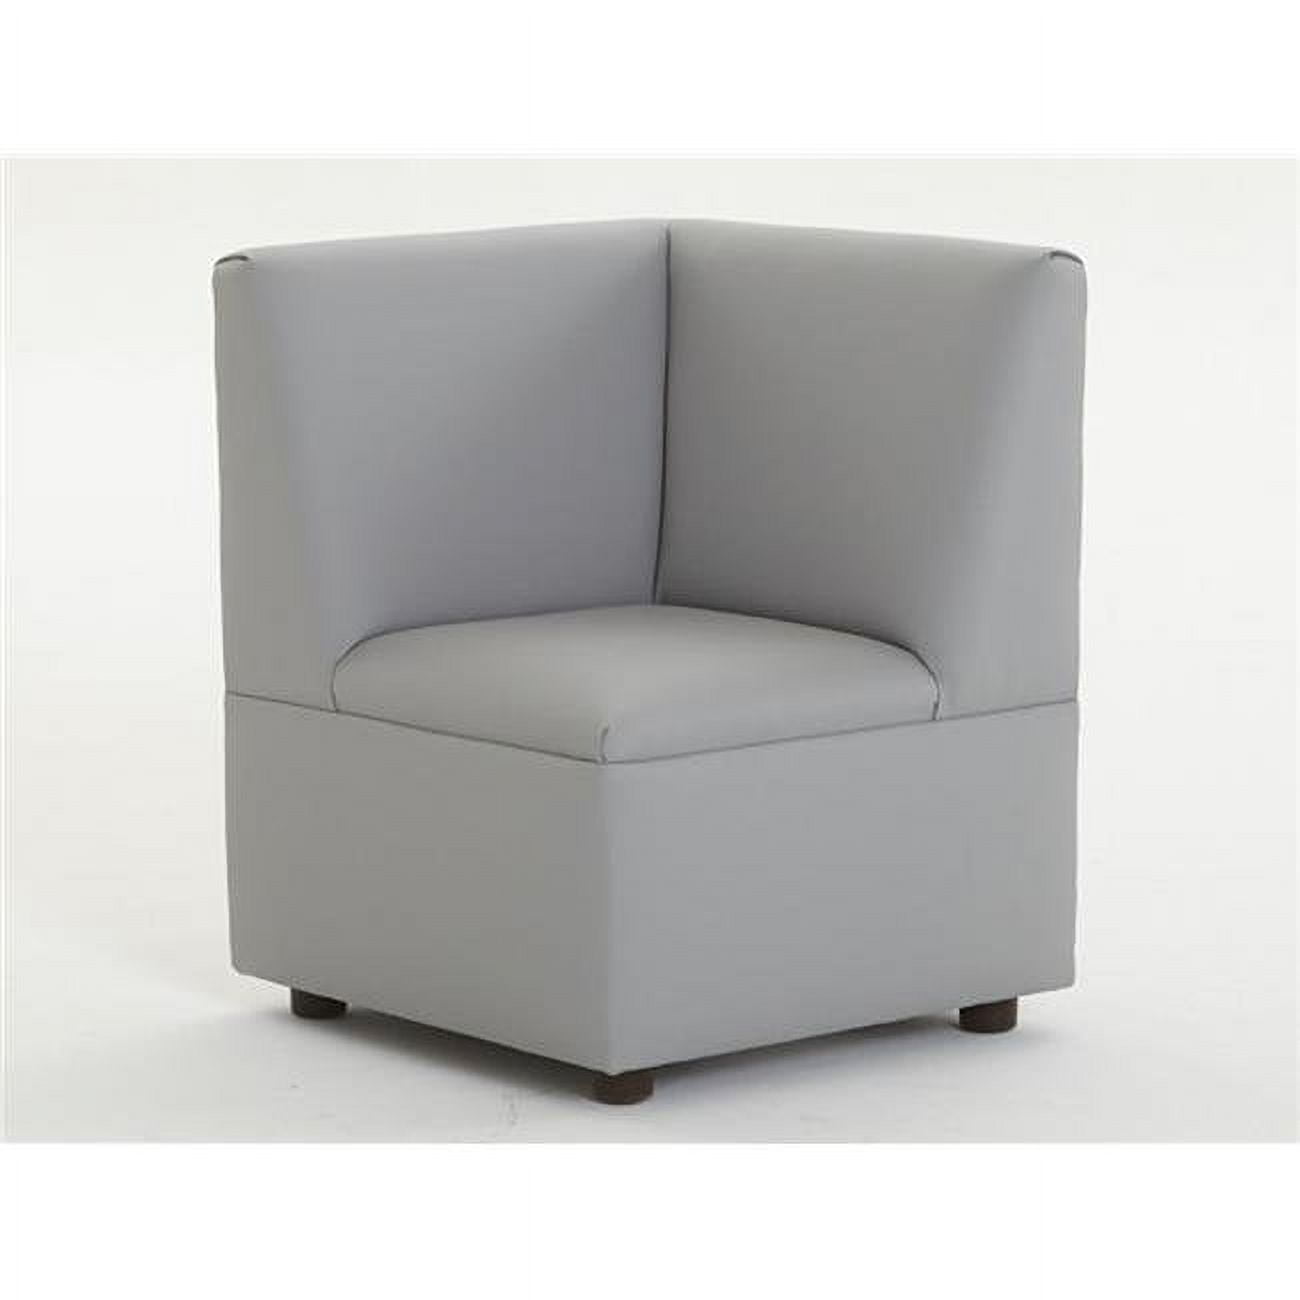 Picture of Brand New World FM0260-211 Modern Casual Cozy Corner Chair, Gray 26 x 20 x 20 in.